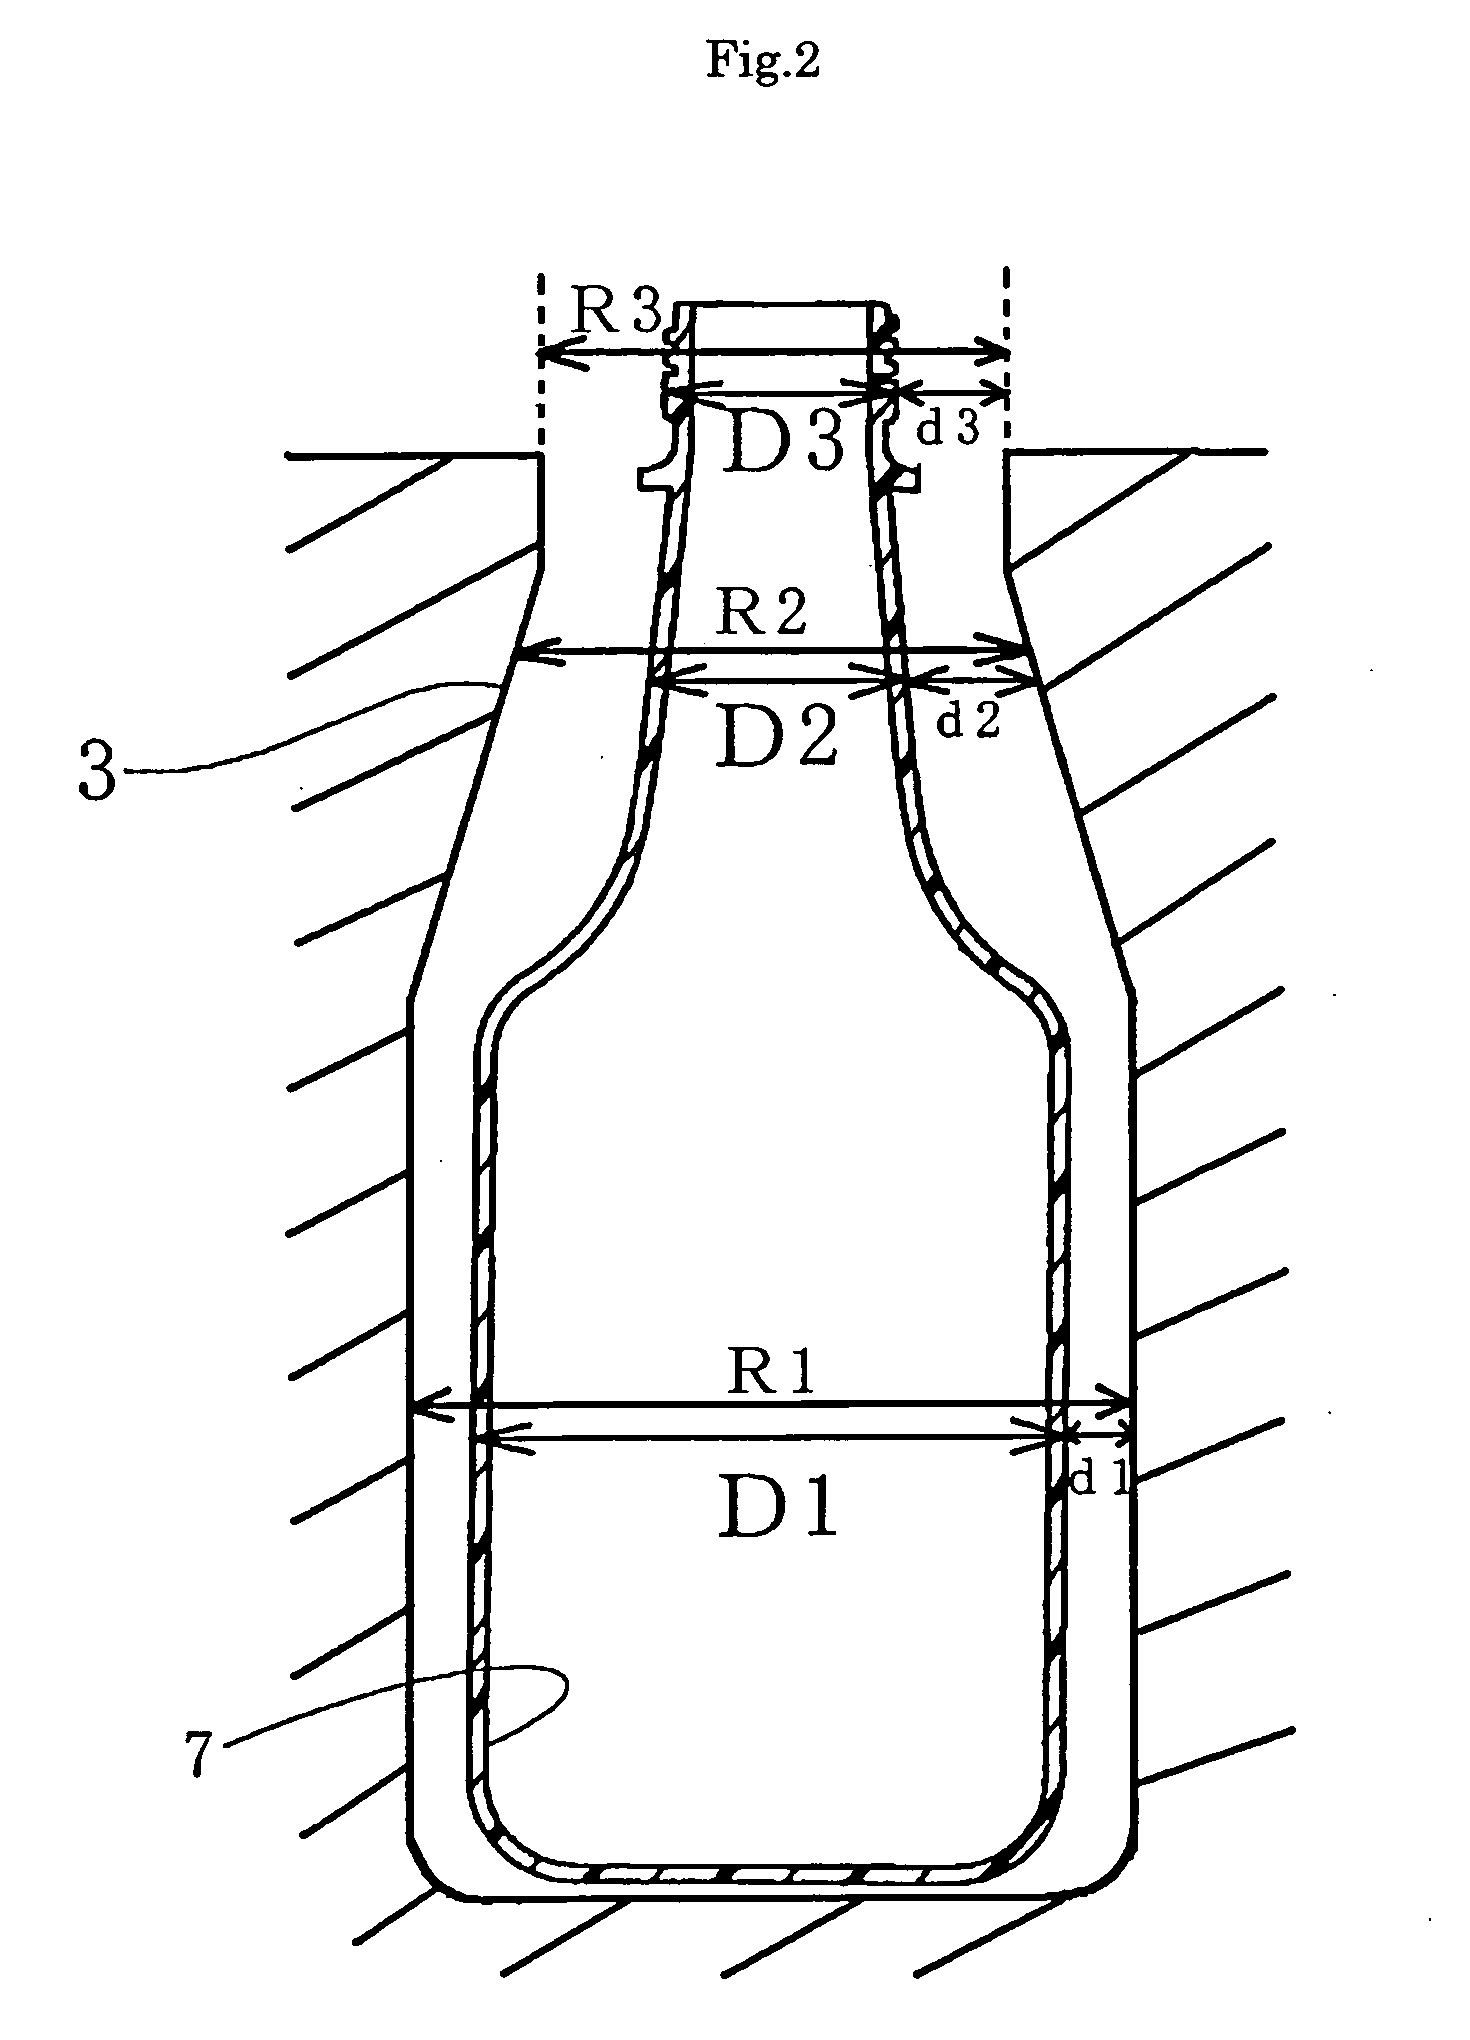 DLC film coated plastic container, and device and method for manufacturing the plastic container